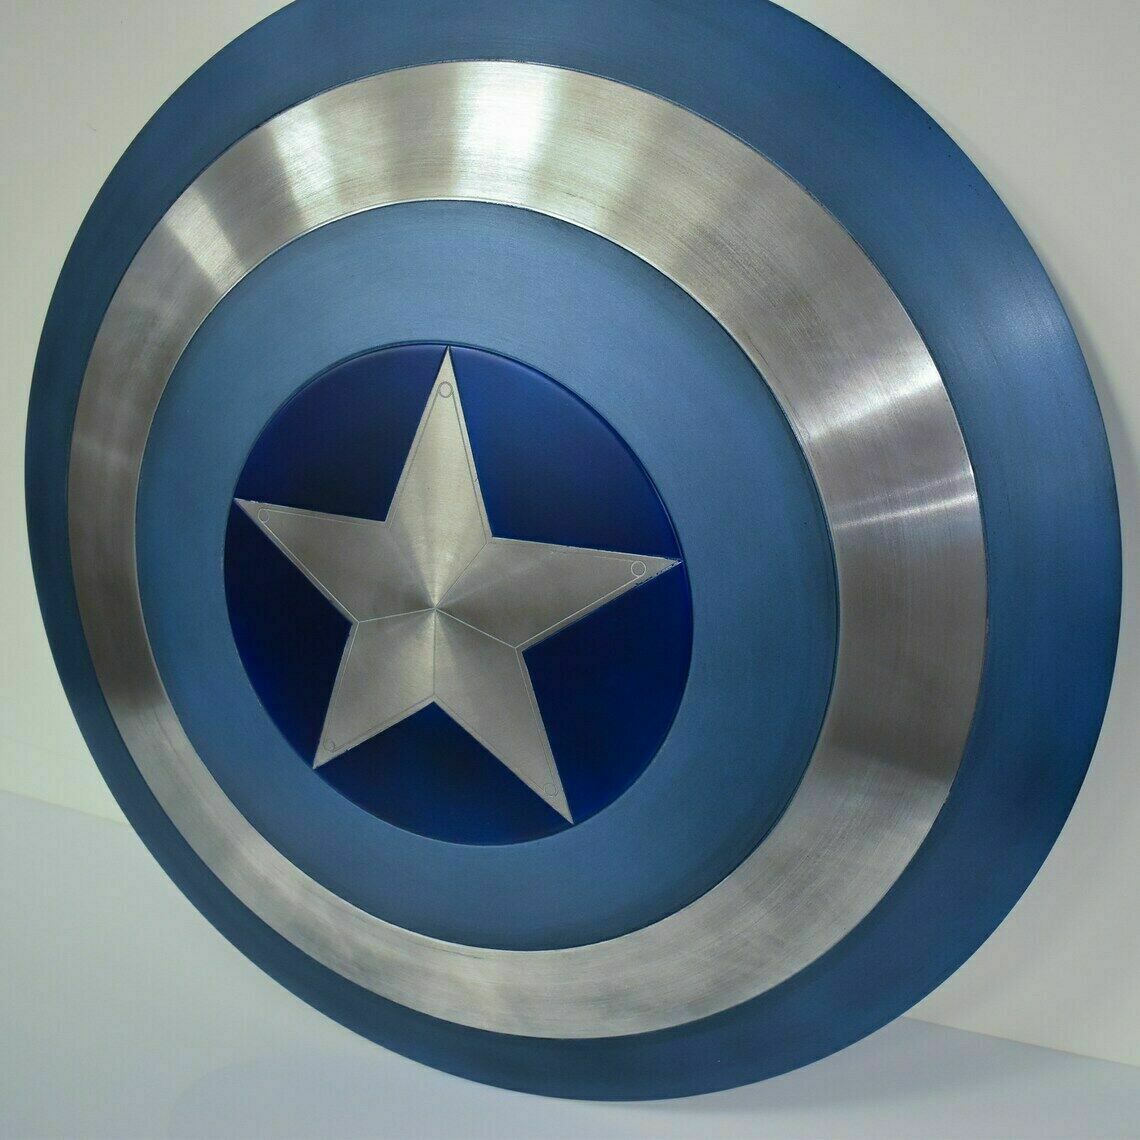 Captain America 22'' Stealth Shield Metal Replica - The Winter Soldier Collectible Marvel Prop